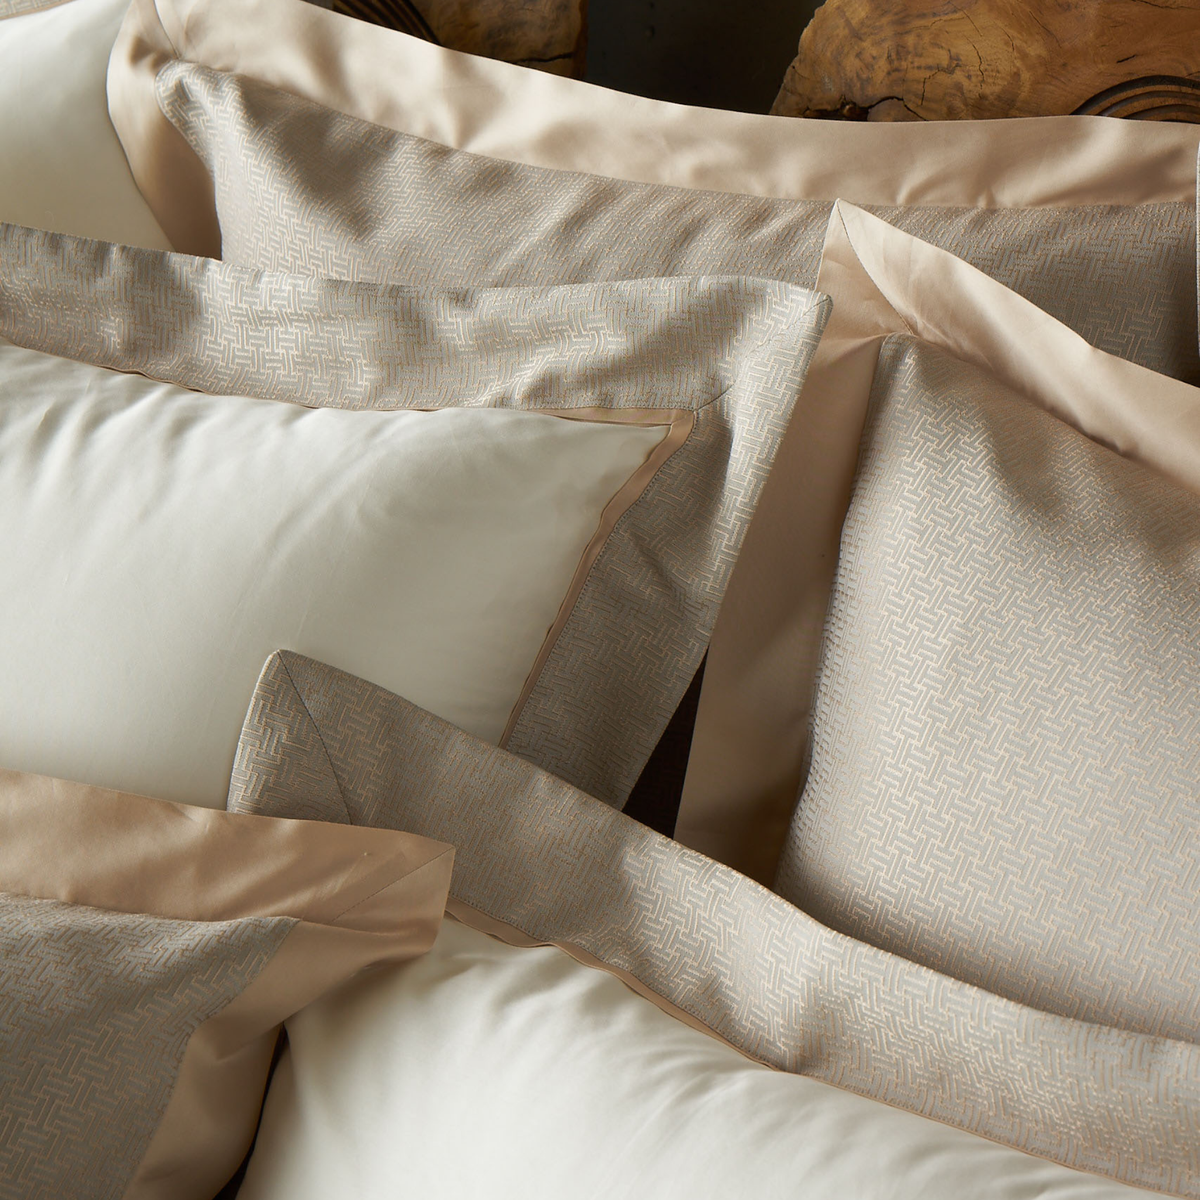 Detail Shot of Pillowcases of Celso de Lemos Avalon Collection